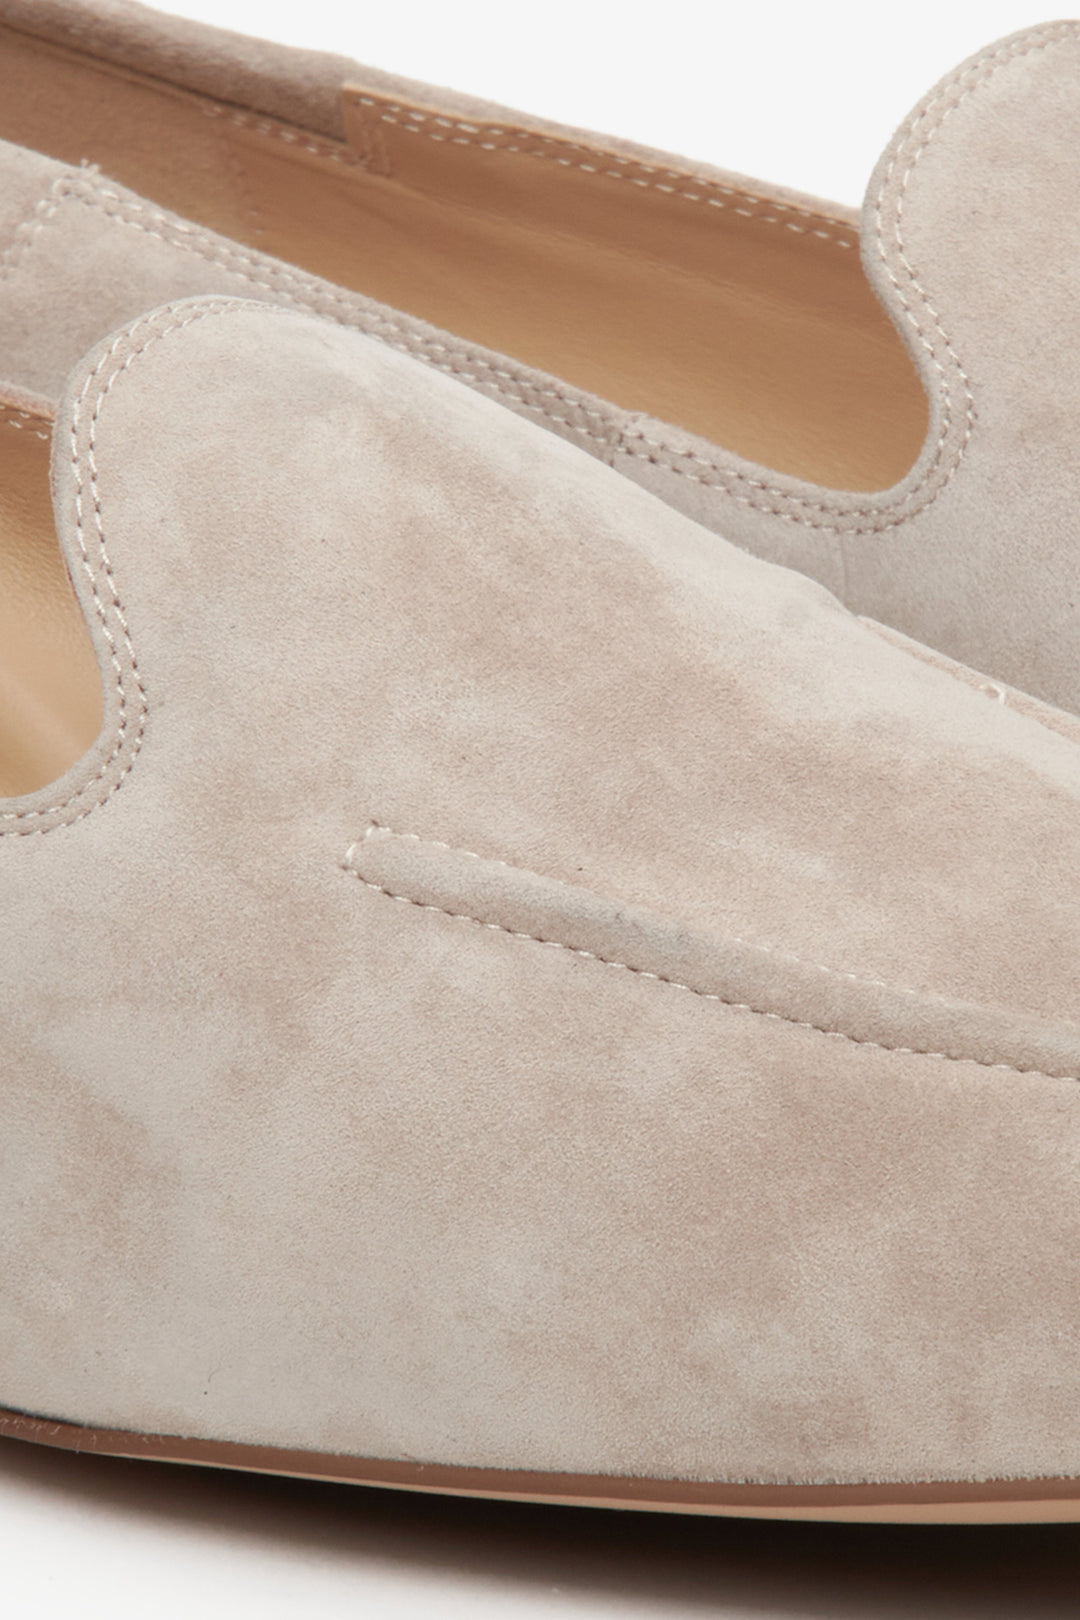 Women's Estro velour moccasins for fall in beige - close-up on details.